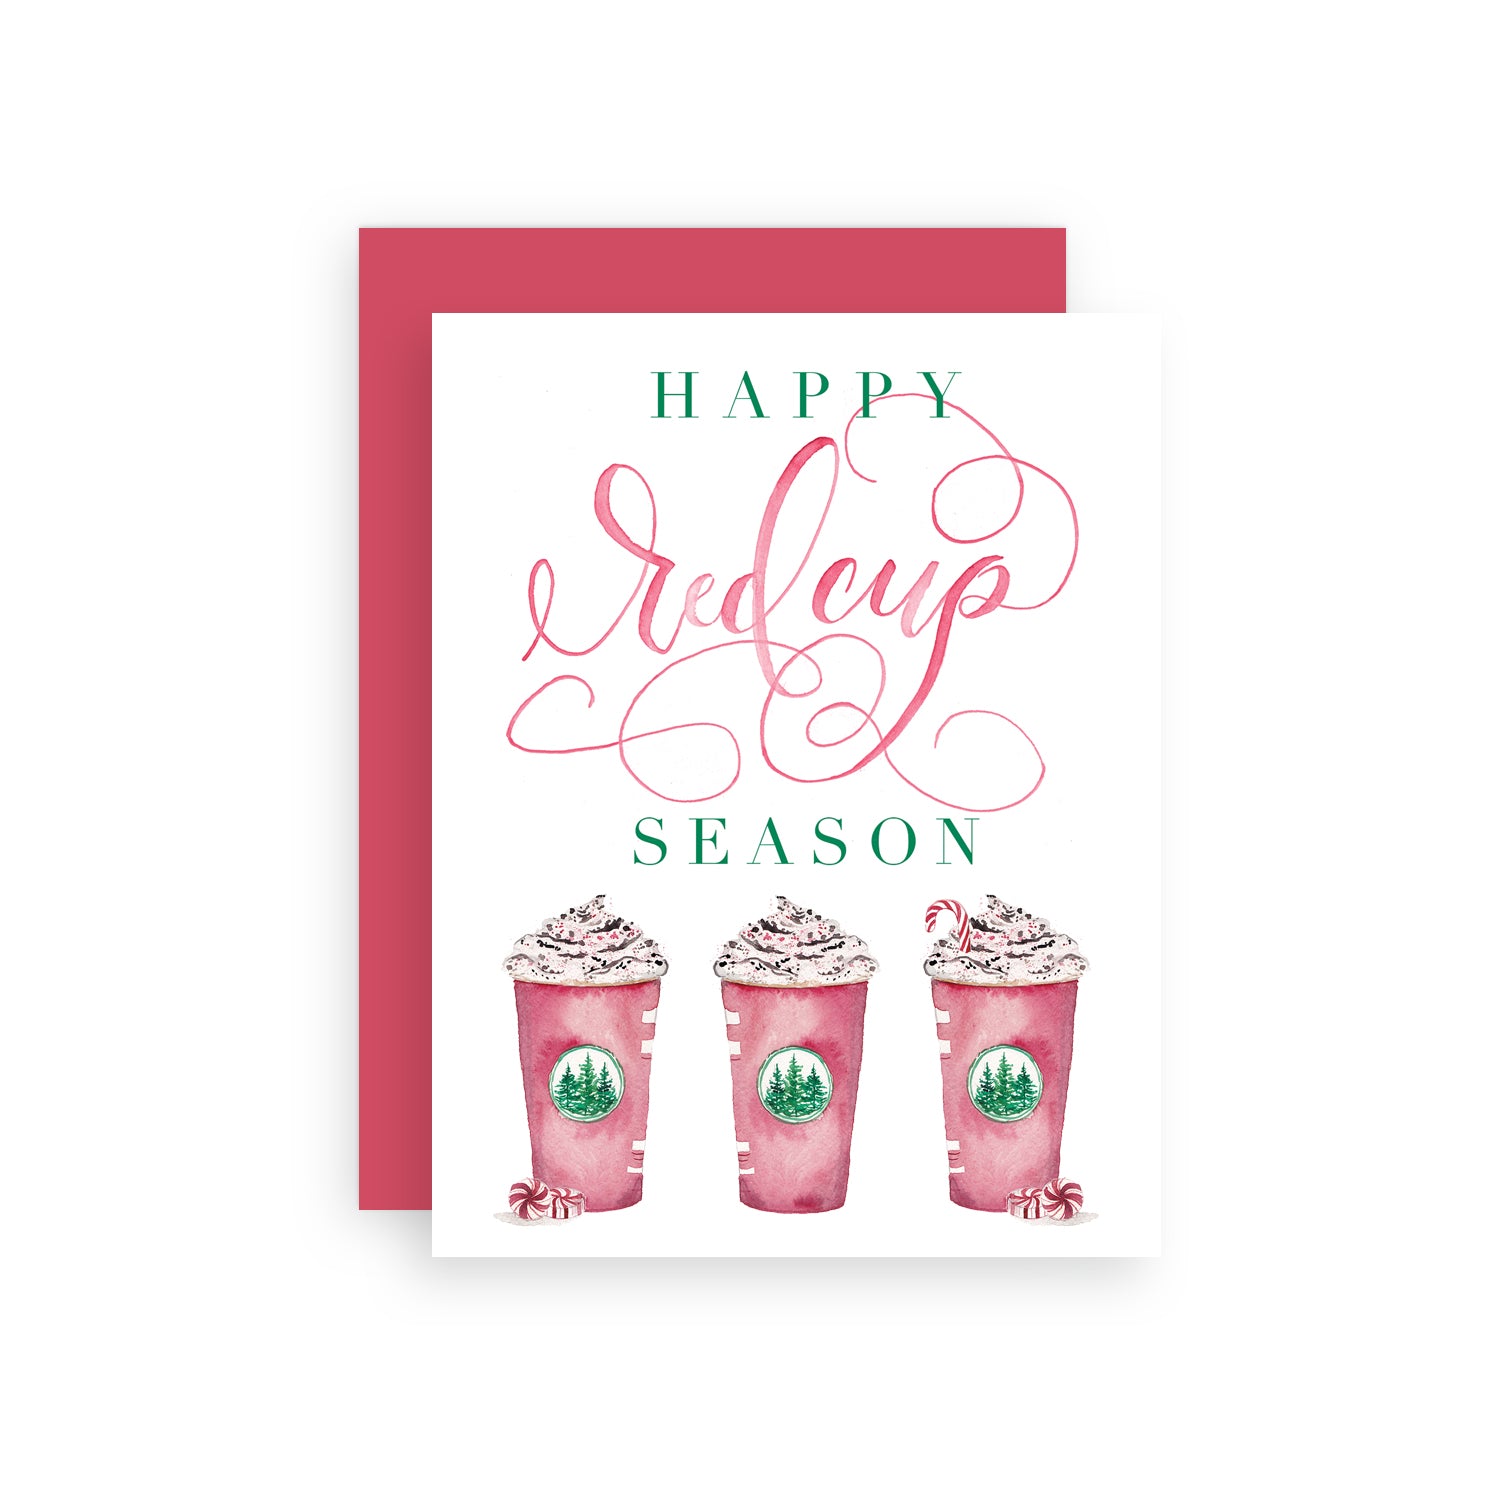 Happy Red Cup Season Greeting Card